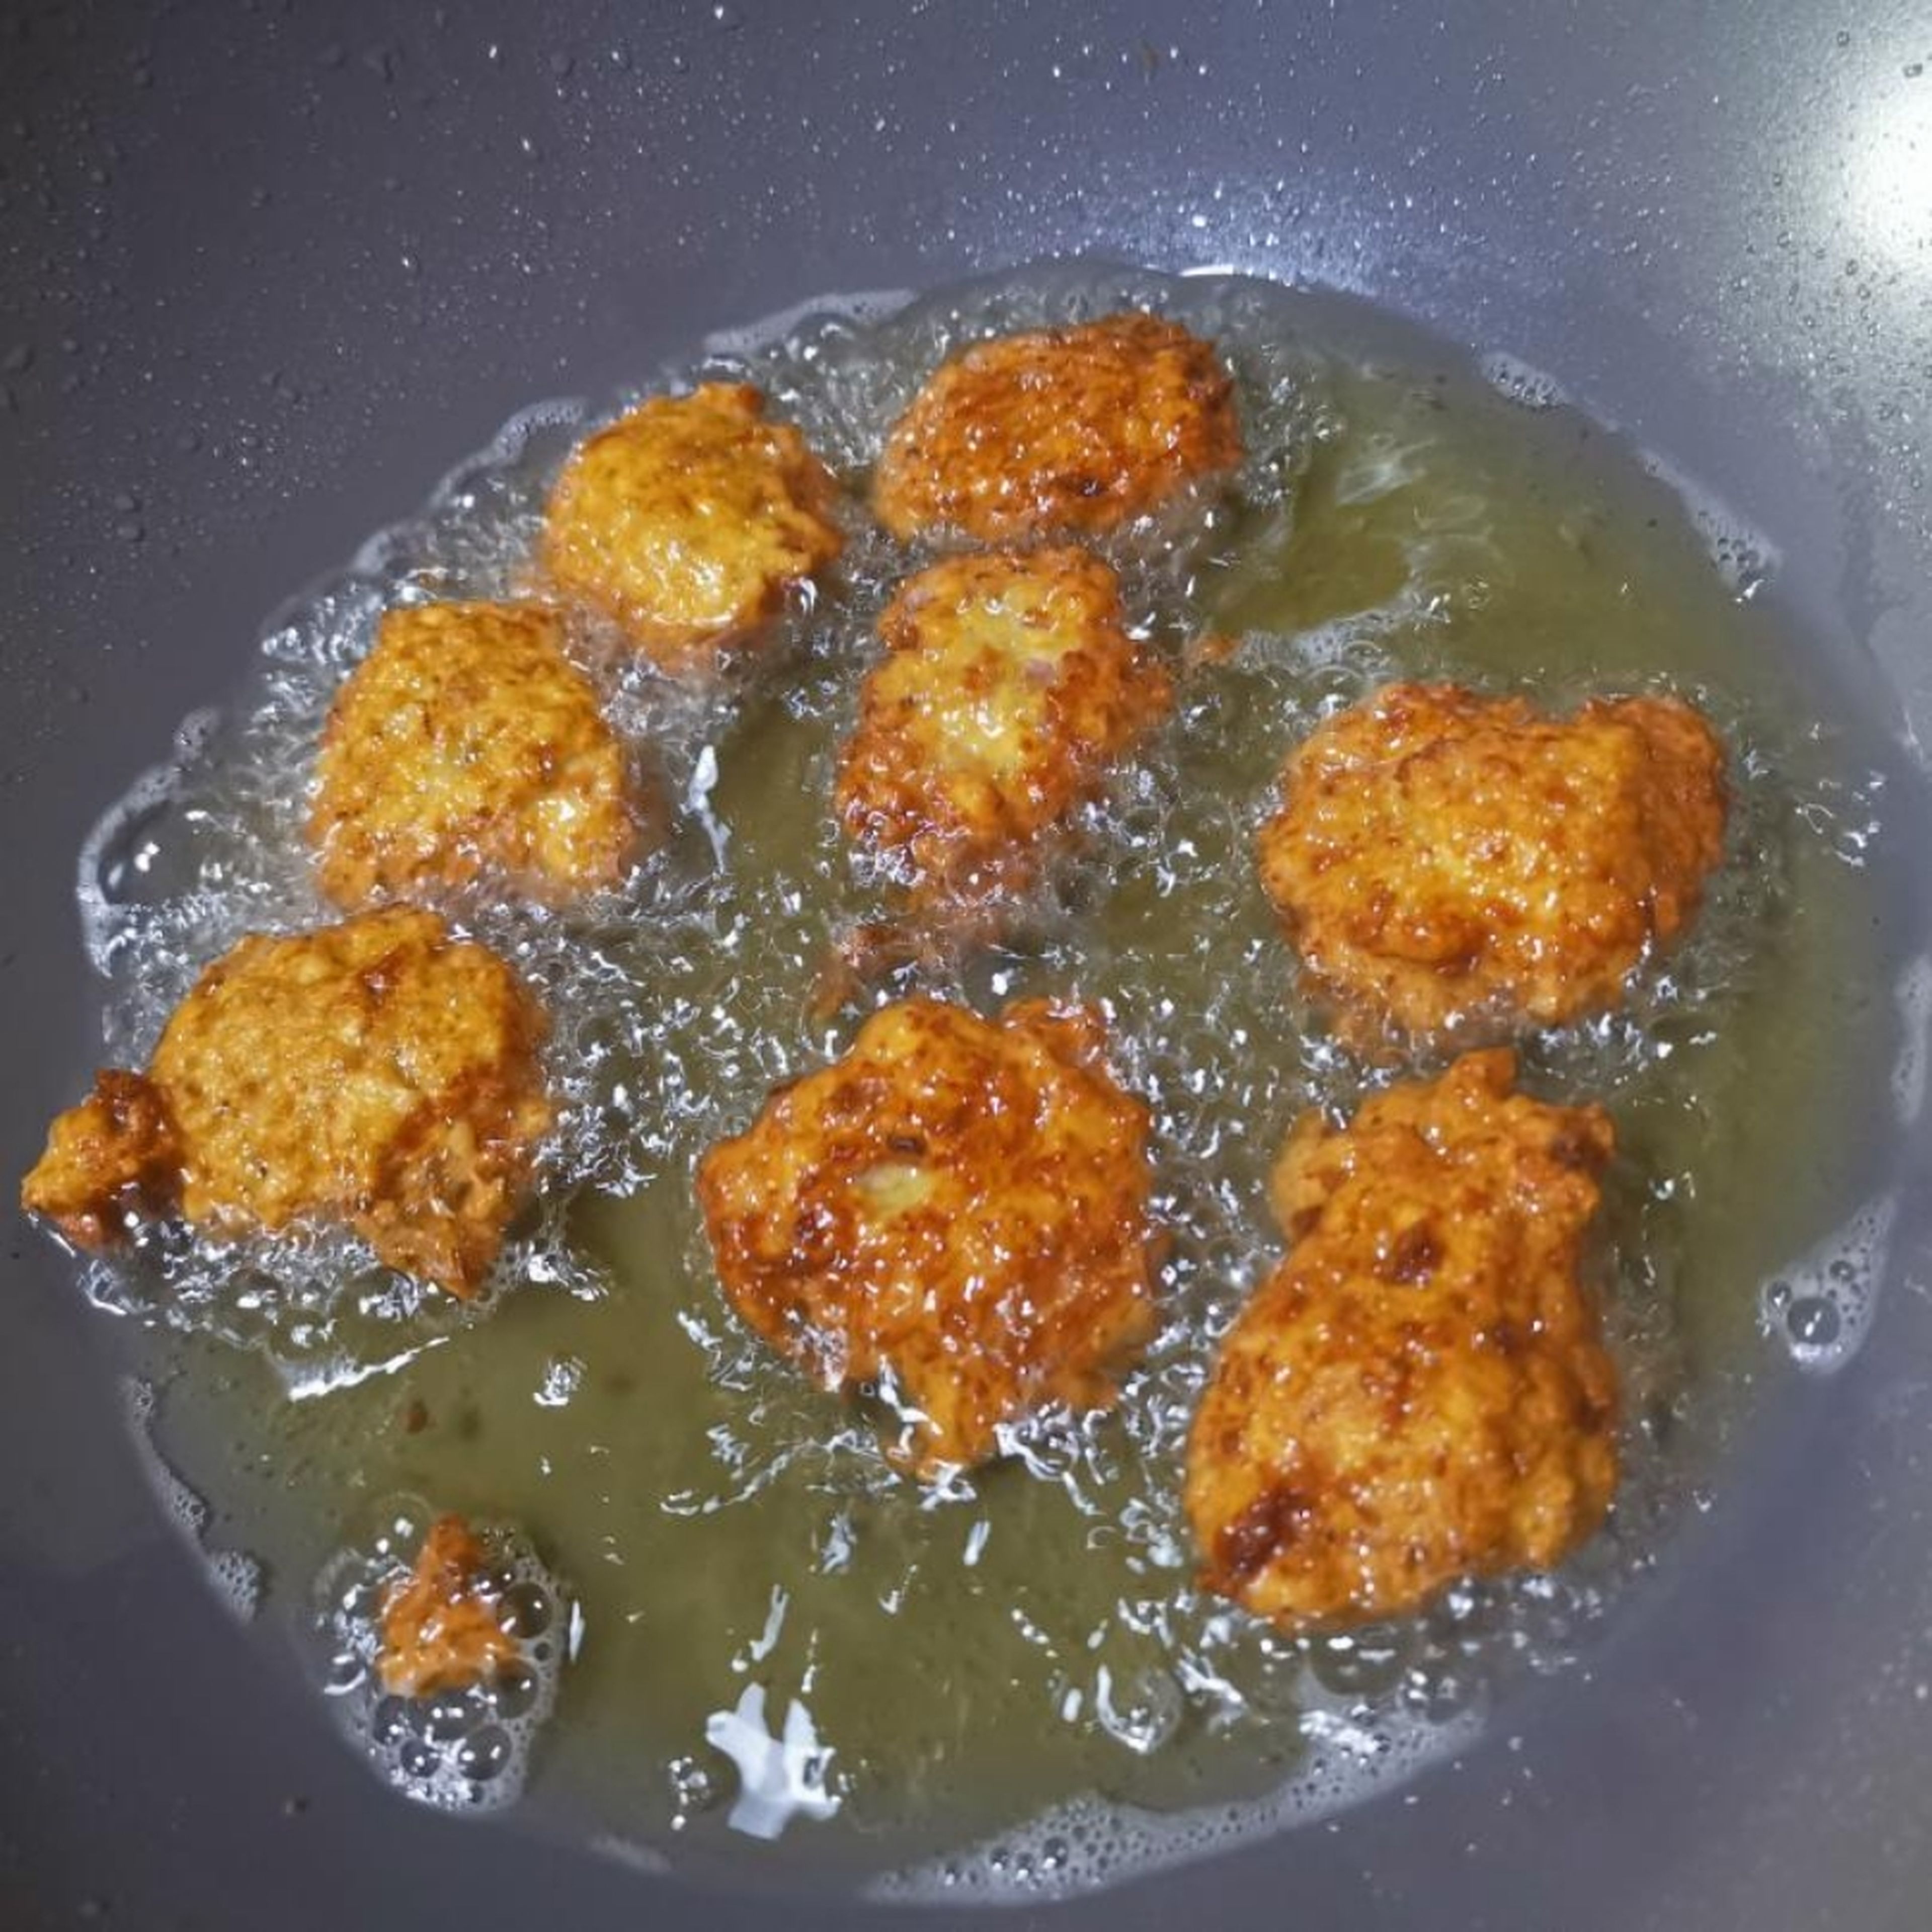 9.Fry the meat balls in the soak oil until it reach nice golden brown colour